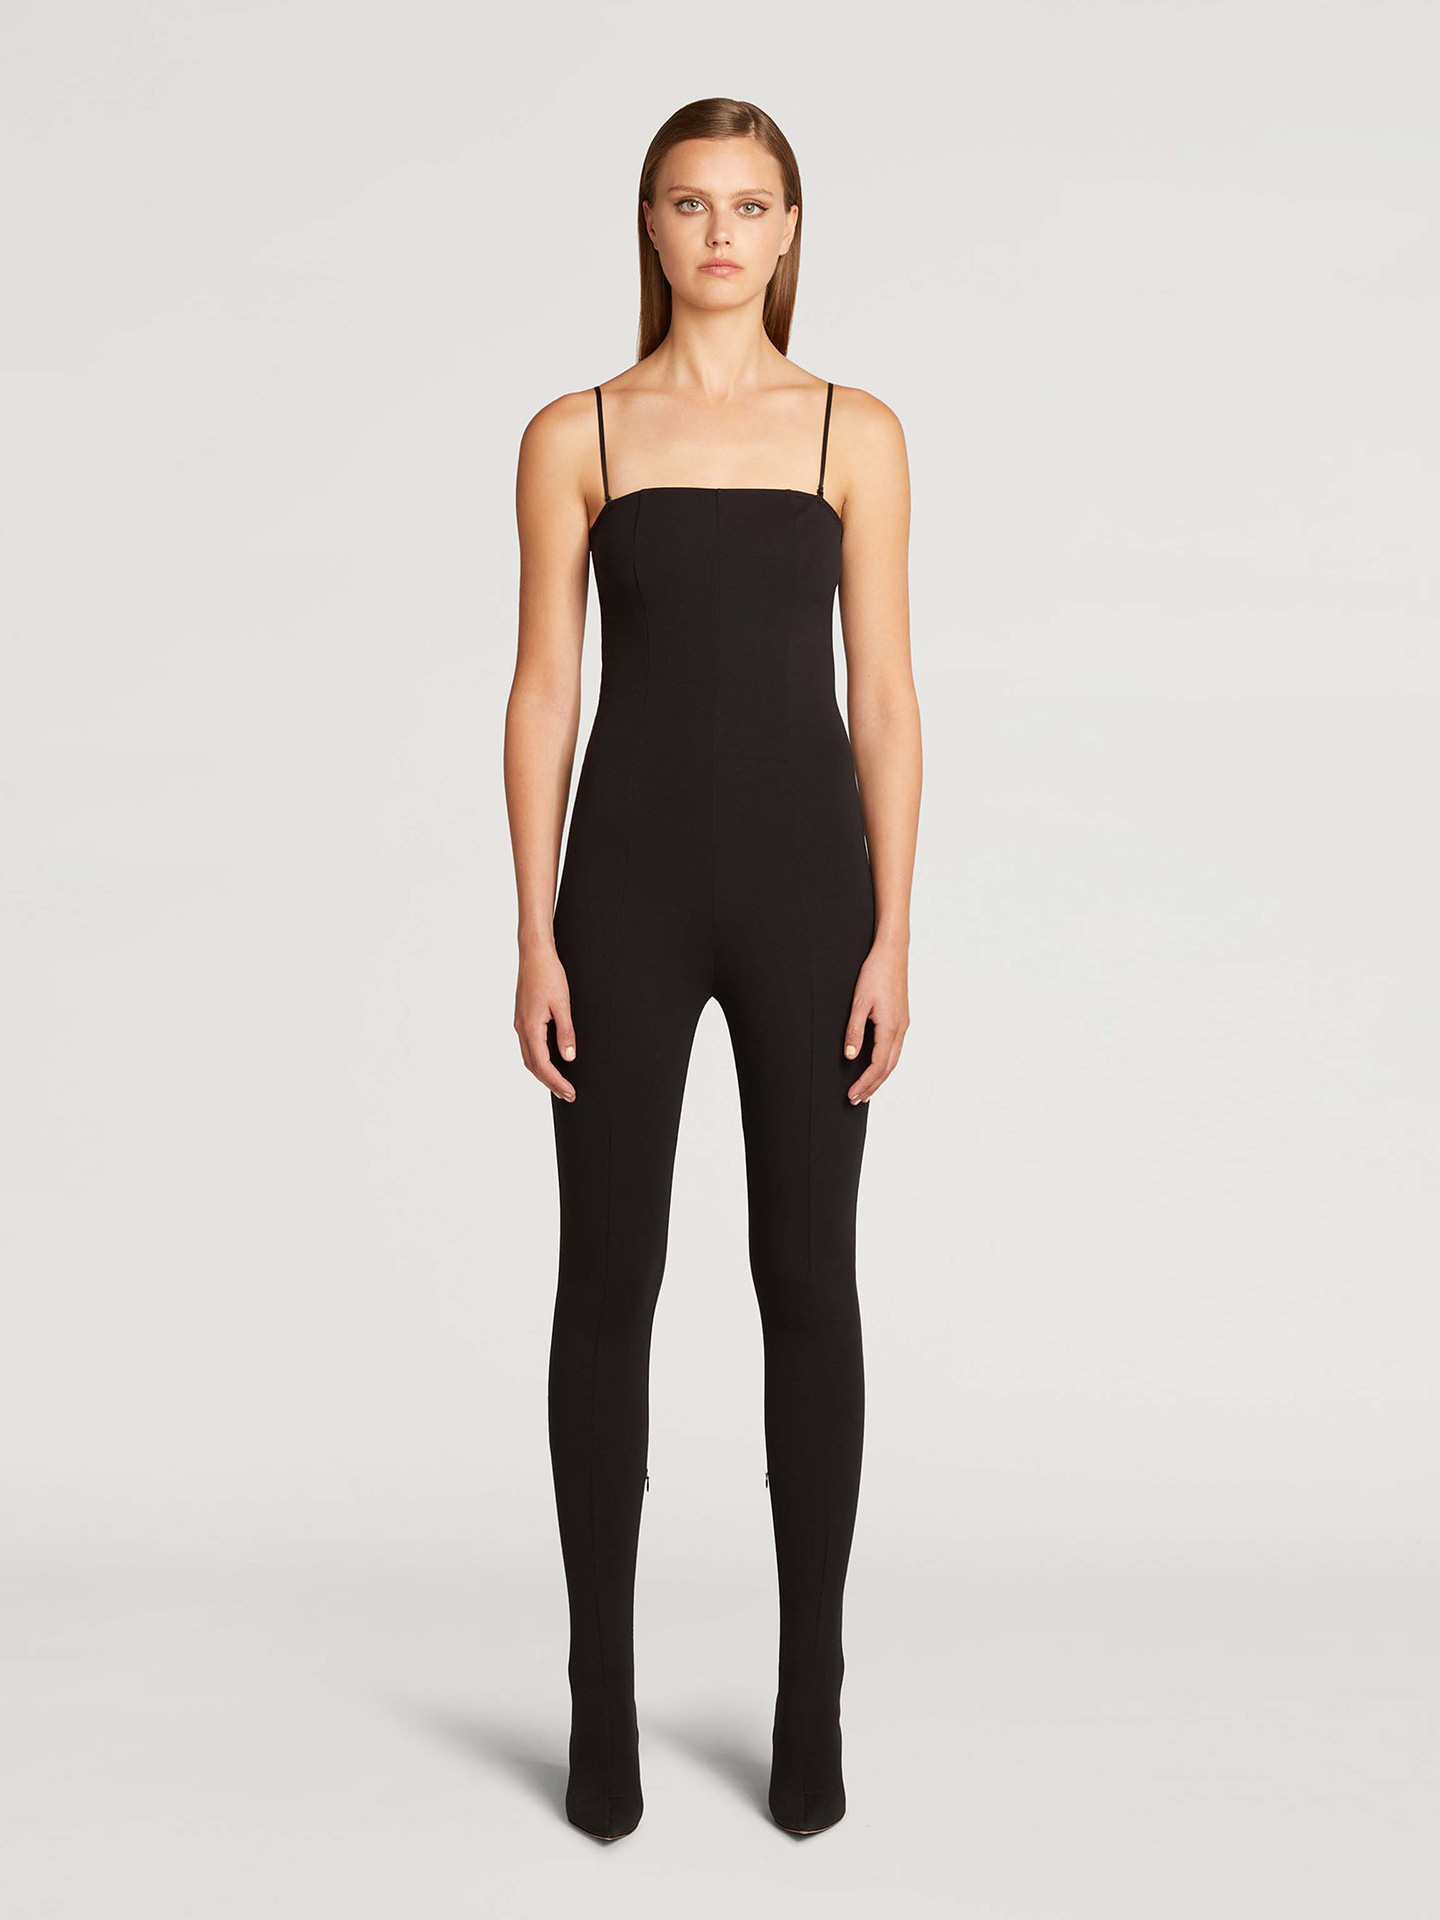 Wolford - Catsuit with shoes, Frau, black, Größe: L36 von Wolford